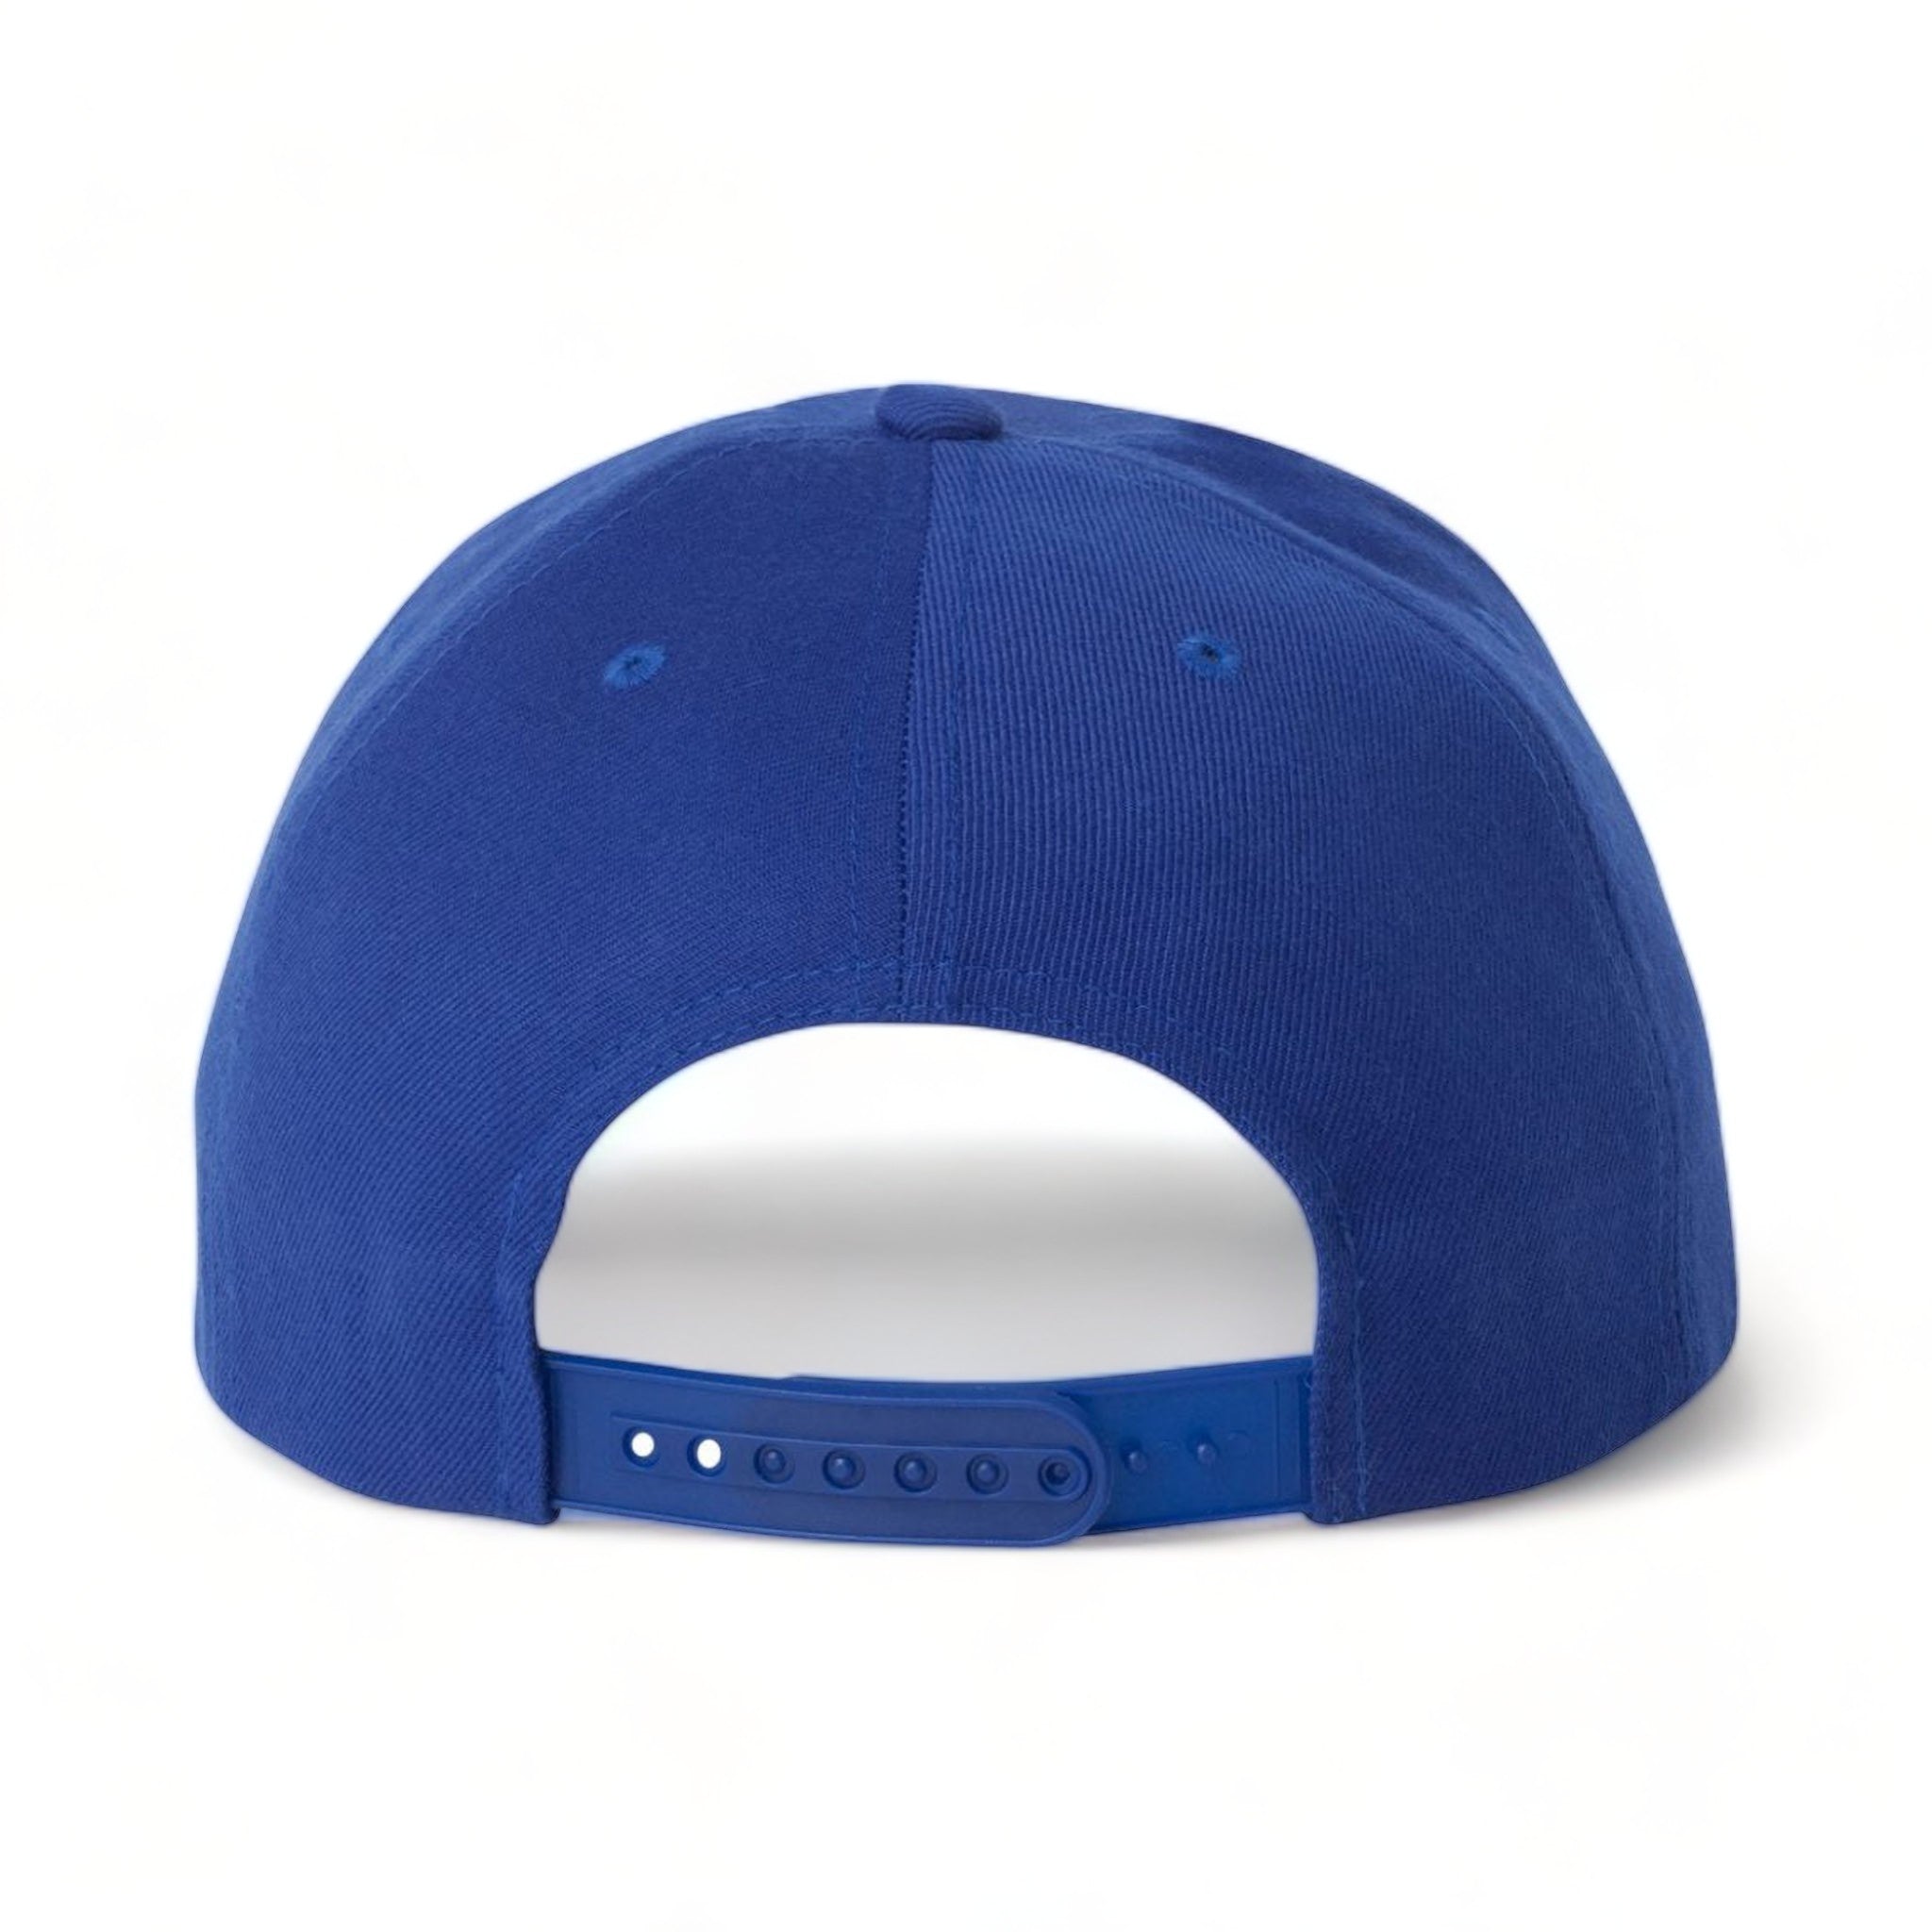 Back view of YP Classics 6089M custom hat in royal blue